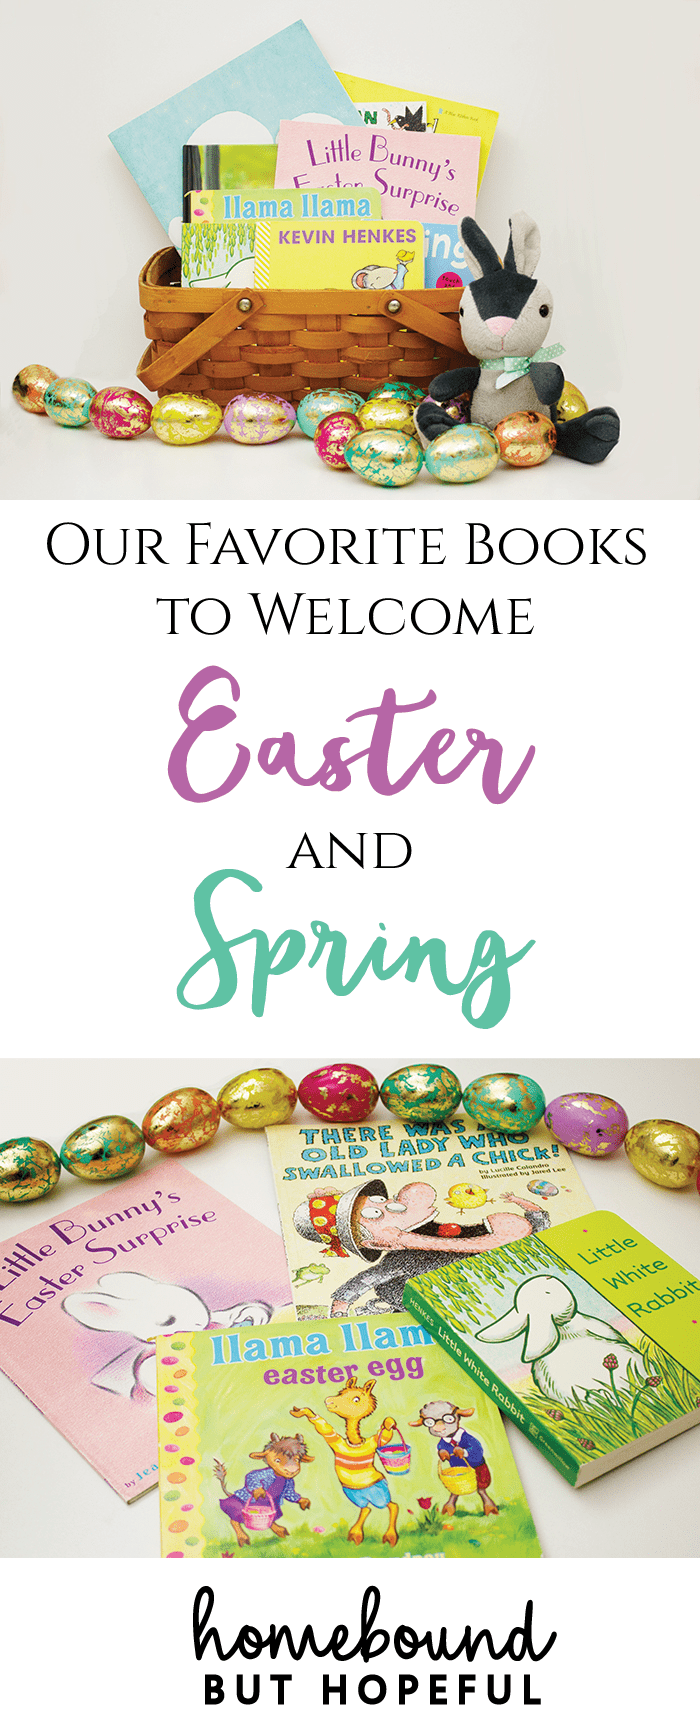 Now that winter seems to finally have passed, we're anxious to welcome spring and the Easter holiday. Check out the list of our favorite kid's books for the season, with selections for all ages. Easter | Spring | Kid's Lit | Children's Books | Reading | Picture Books